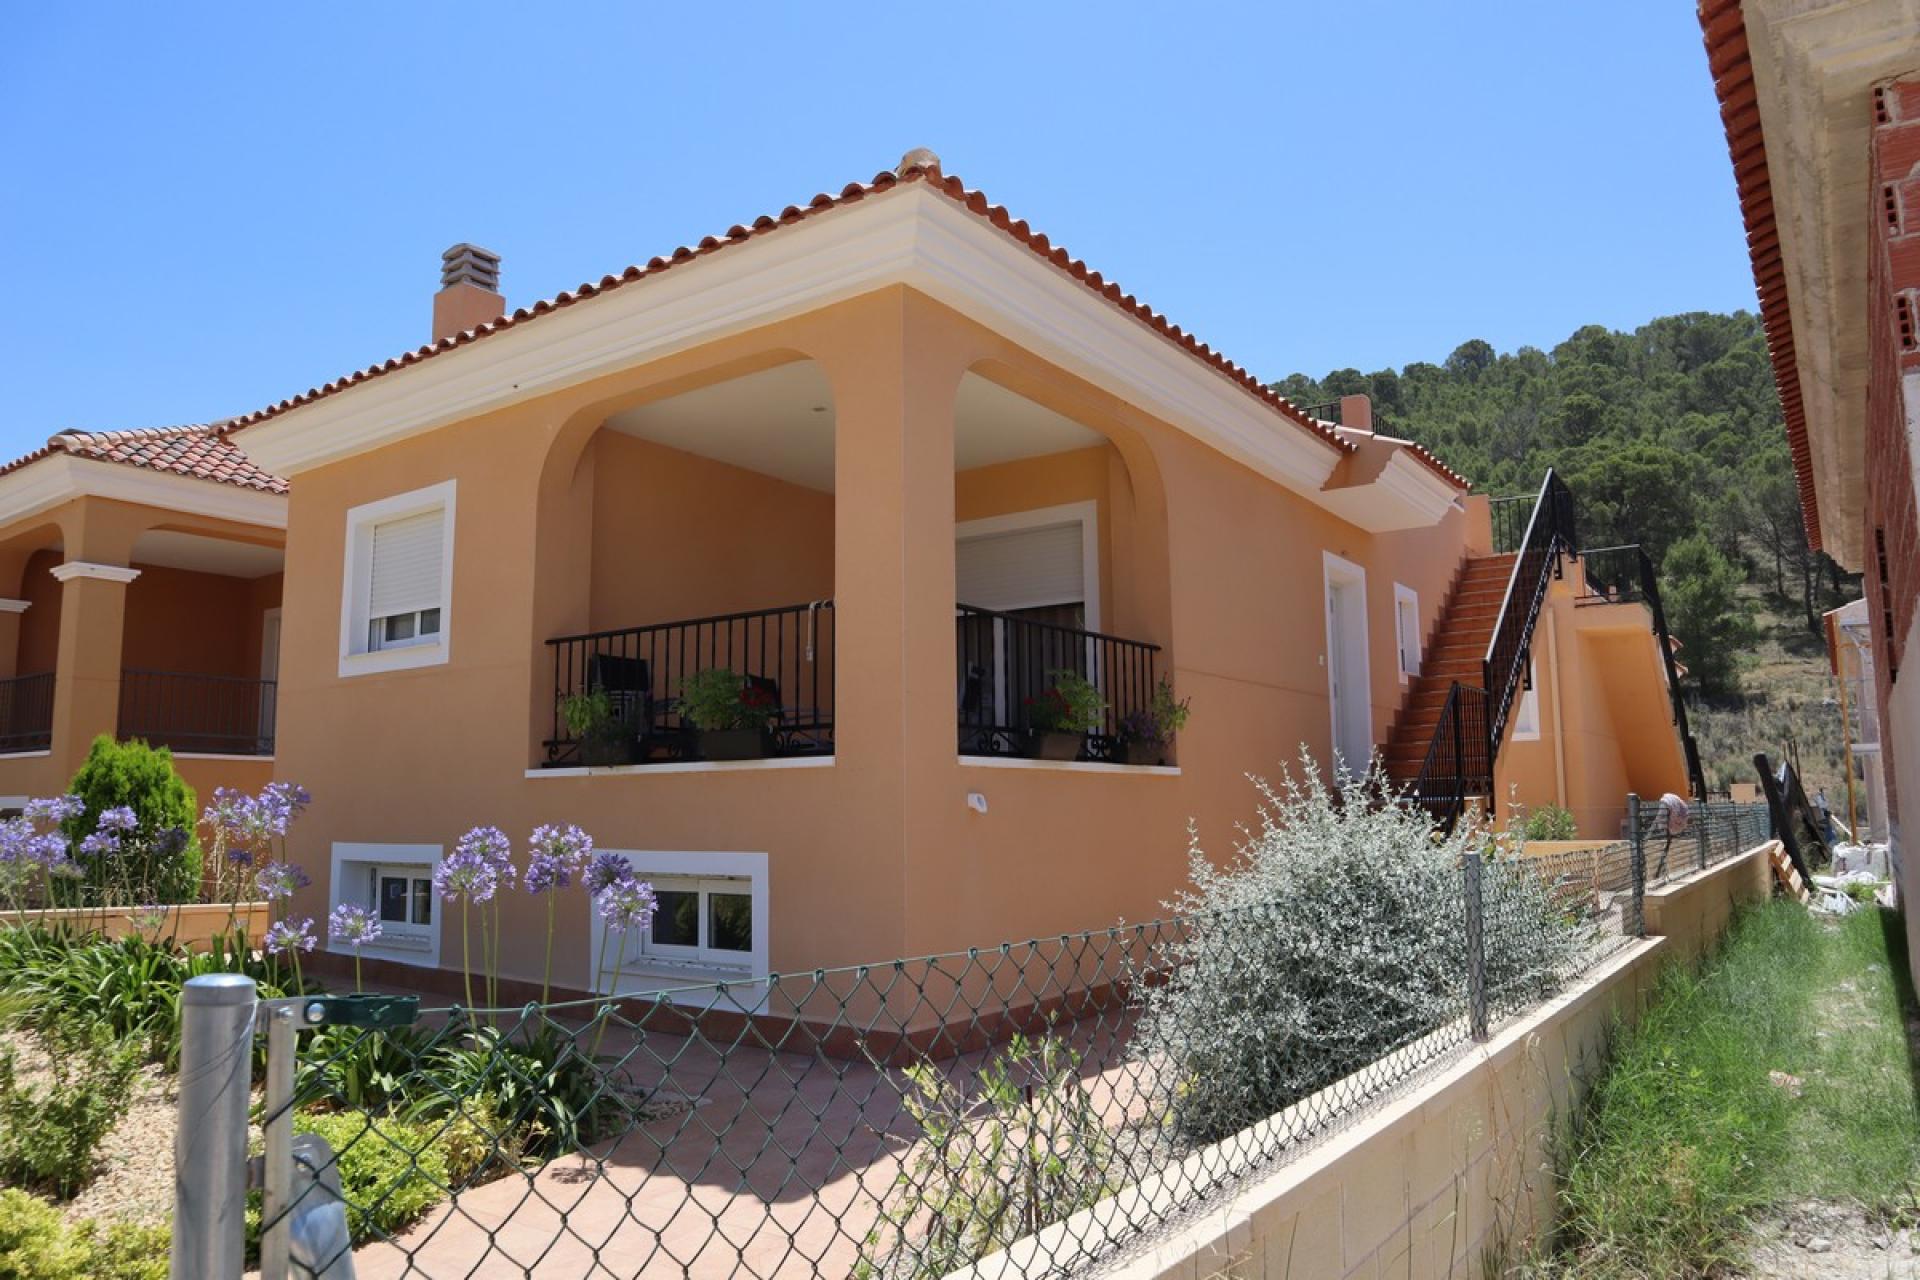 Cheap detached house for sale inland Alicante in Medvilla Spanje